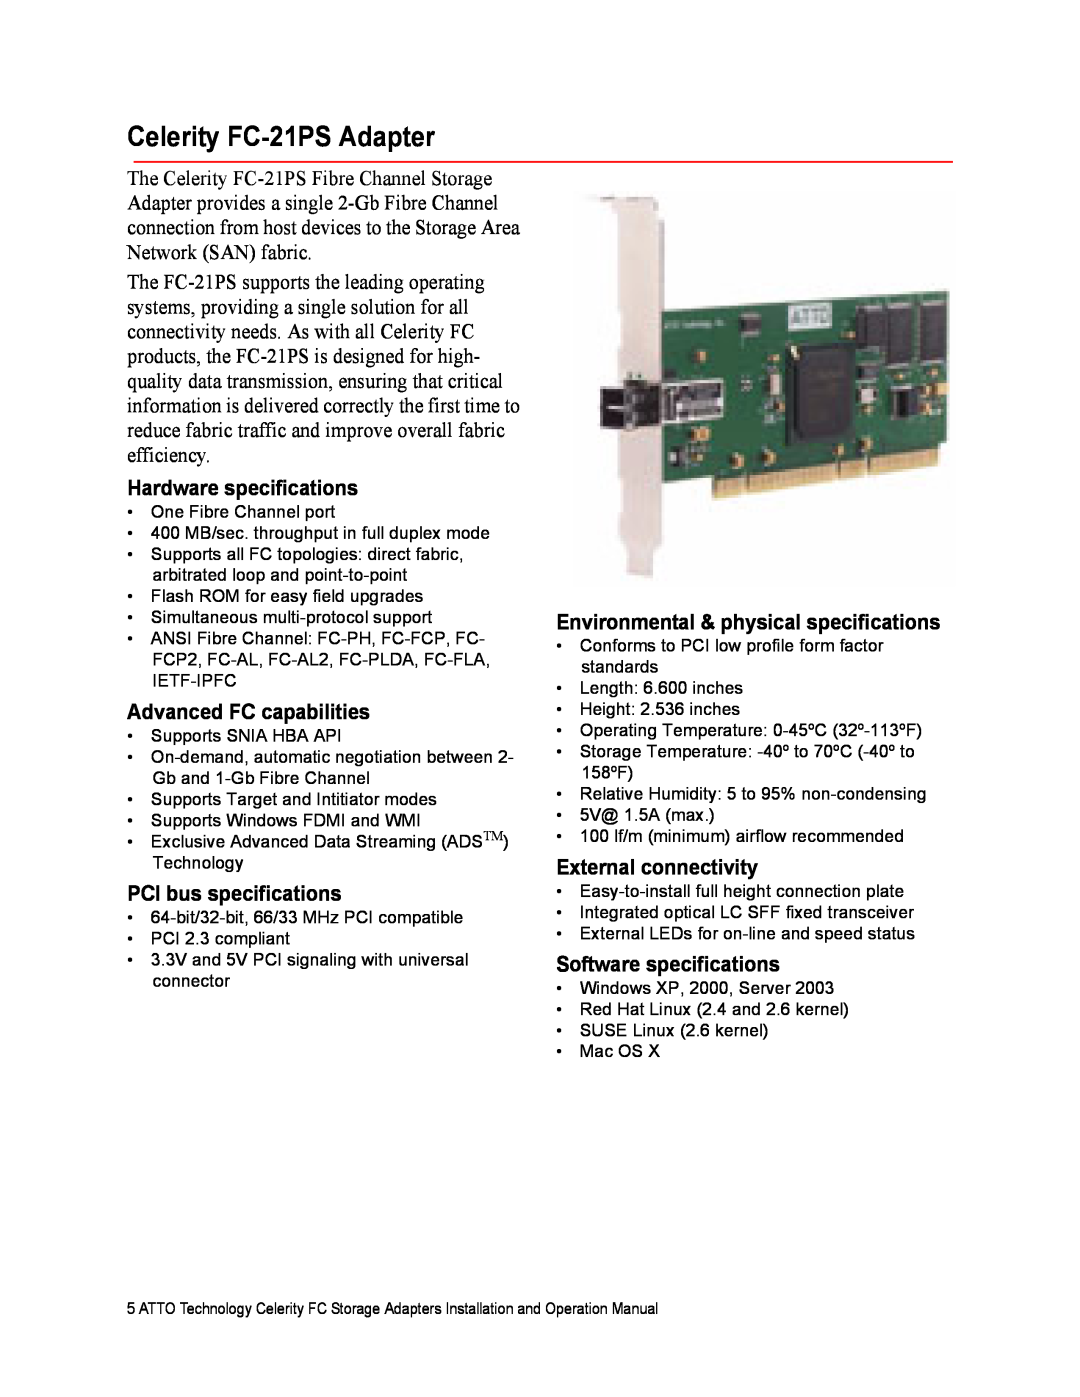 ATTO Technology FC-42XS Celerity FC-21PS Adapter, Hardware specifications, Advanced FC capabilities, External connectivity 